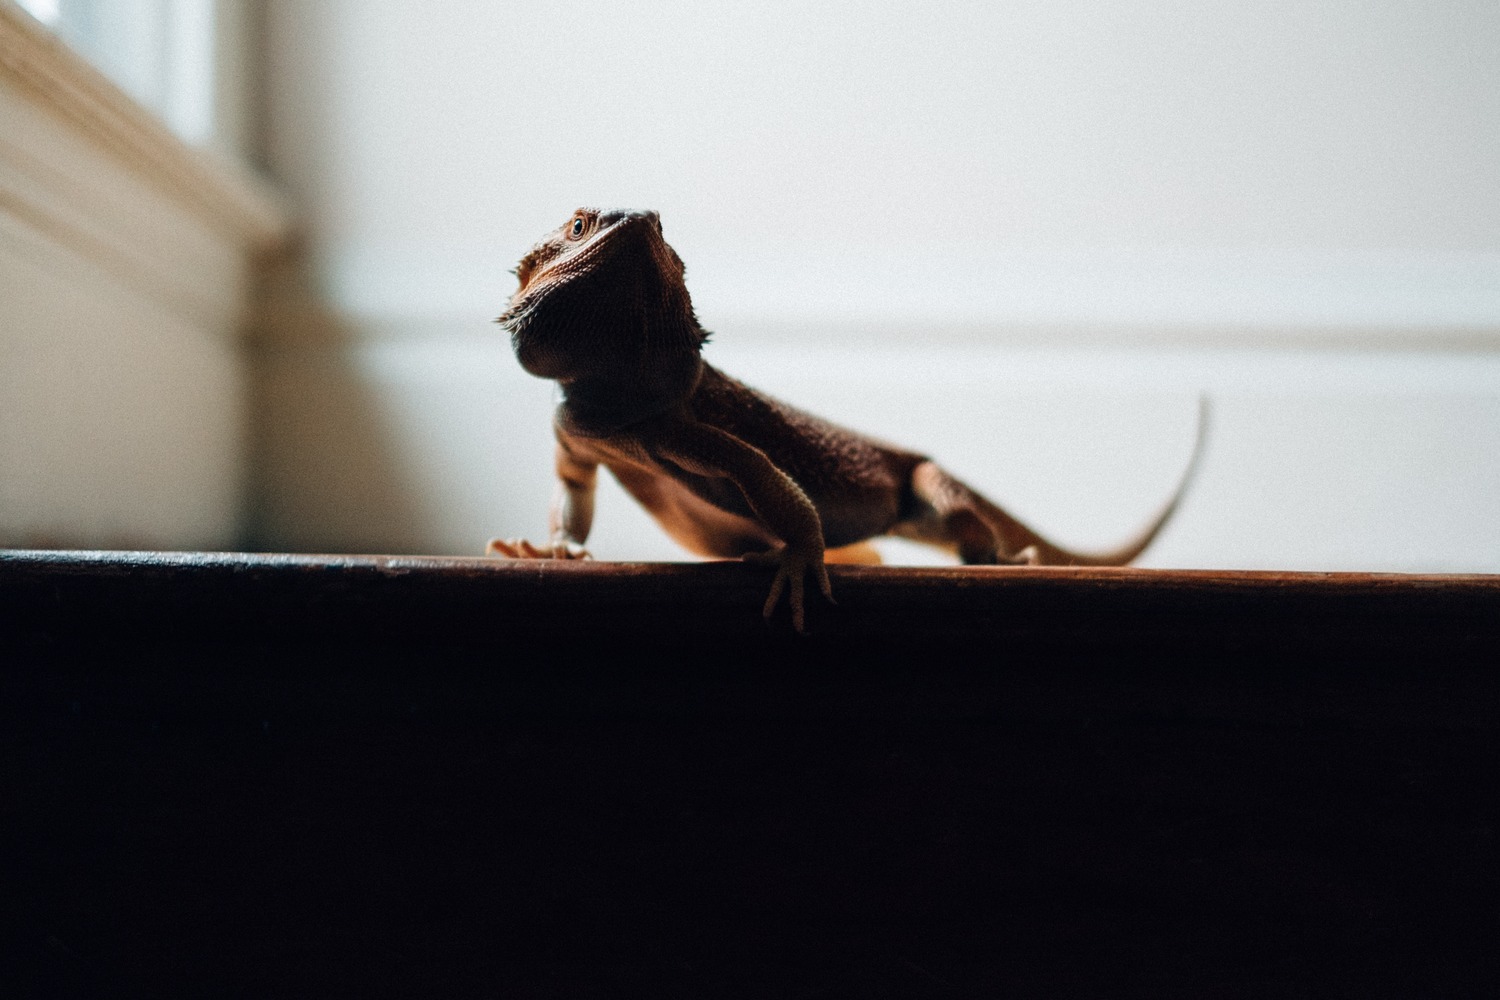 reptile on stairs